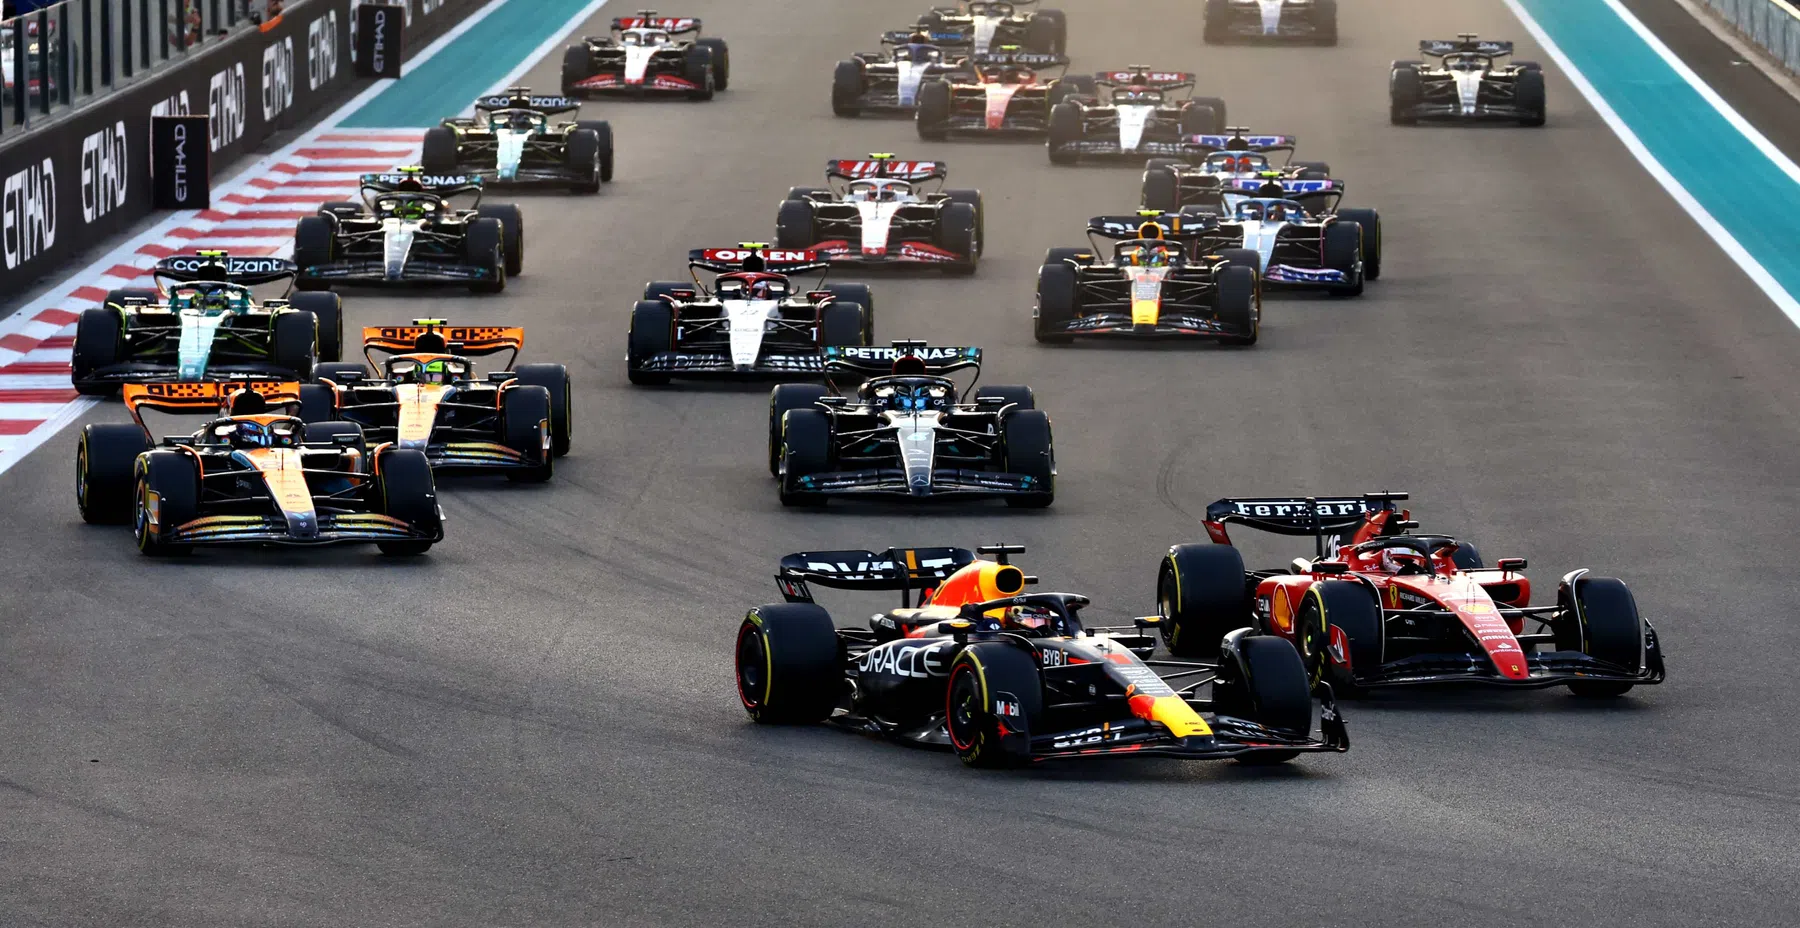 FIA takes action after extreme conditions F1 weekend Qatar